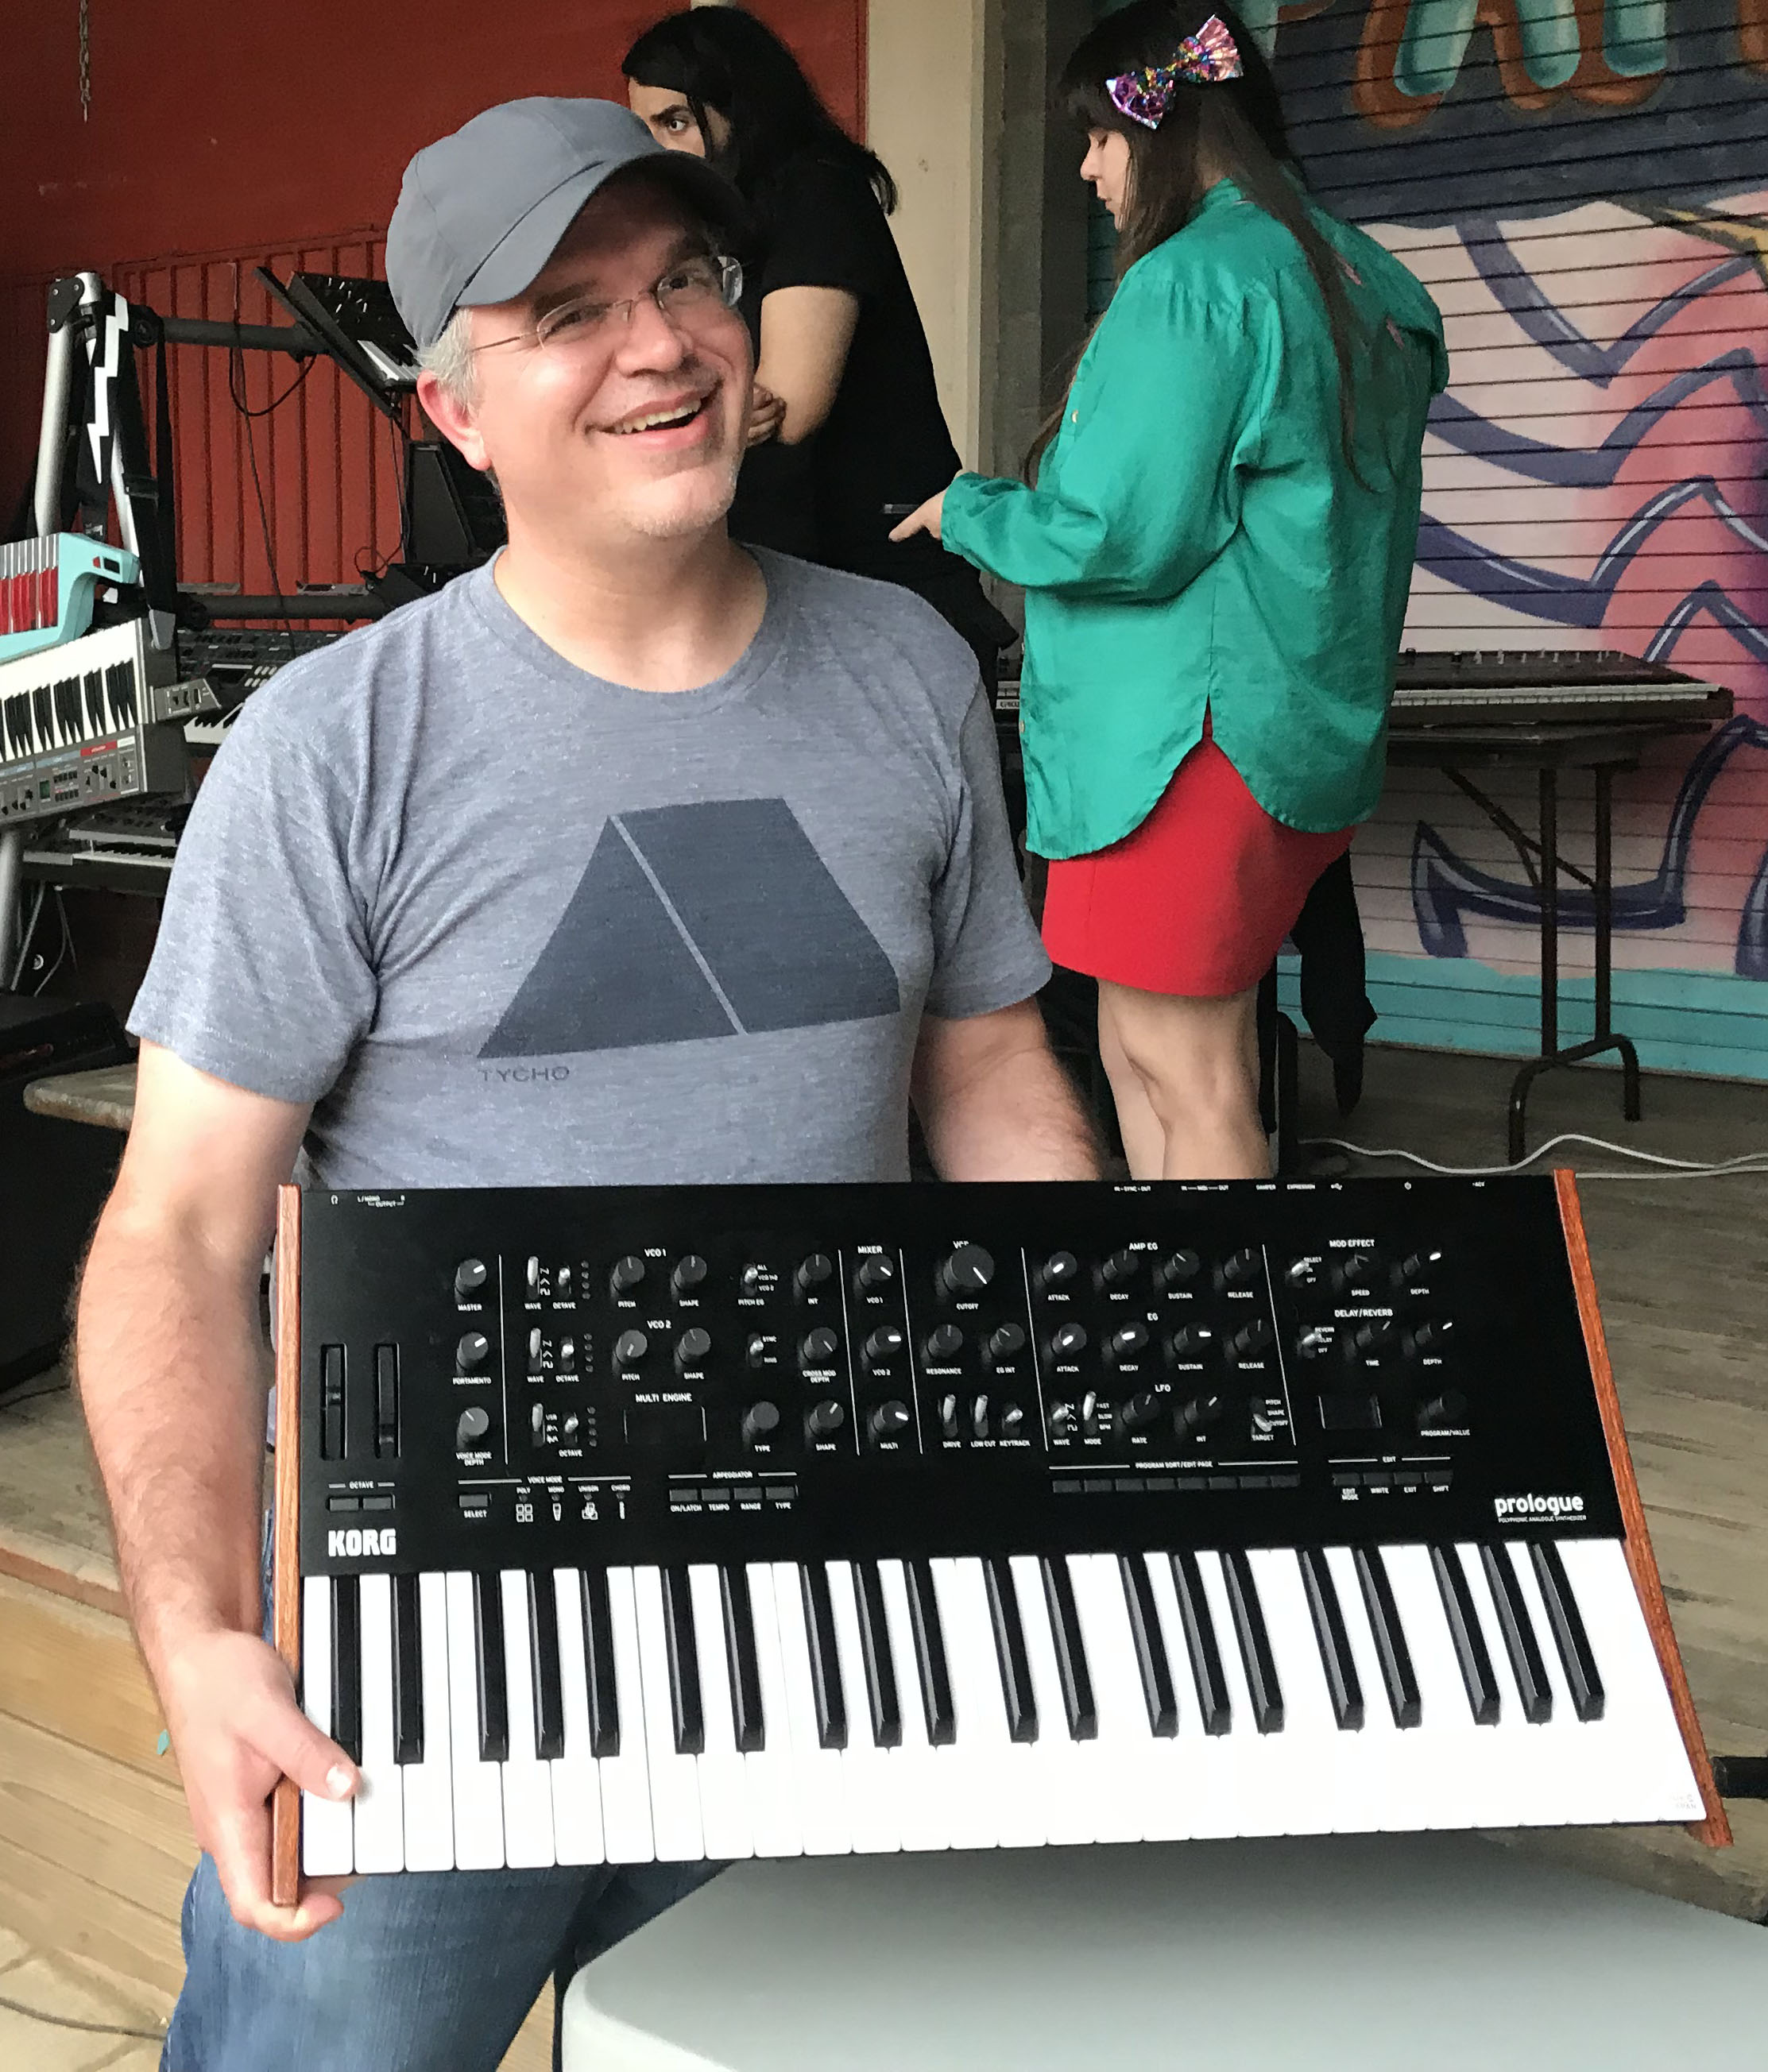 Synthomania 2018 Korg Prologue winner, with keyboard